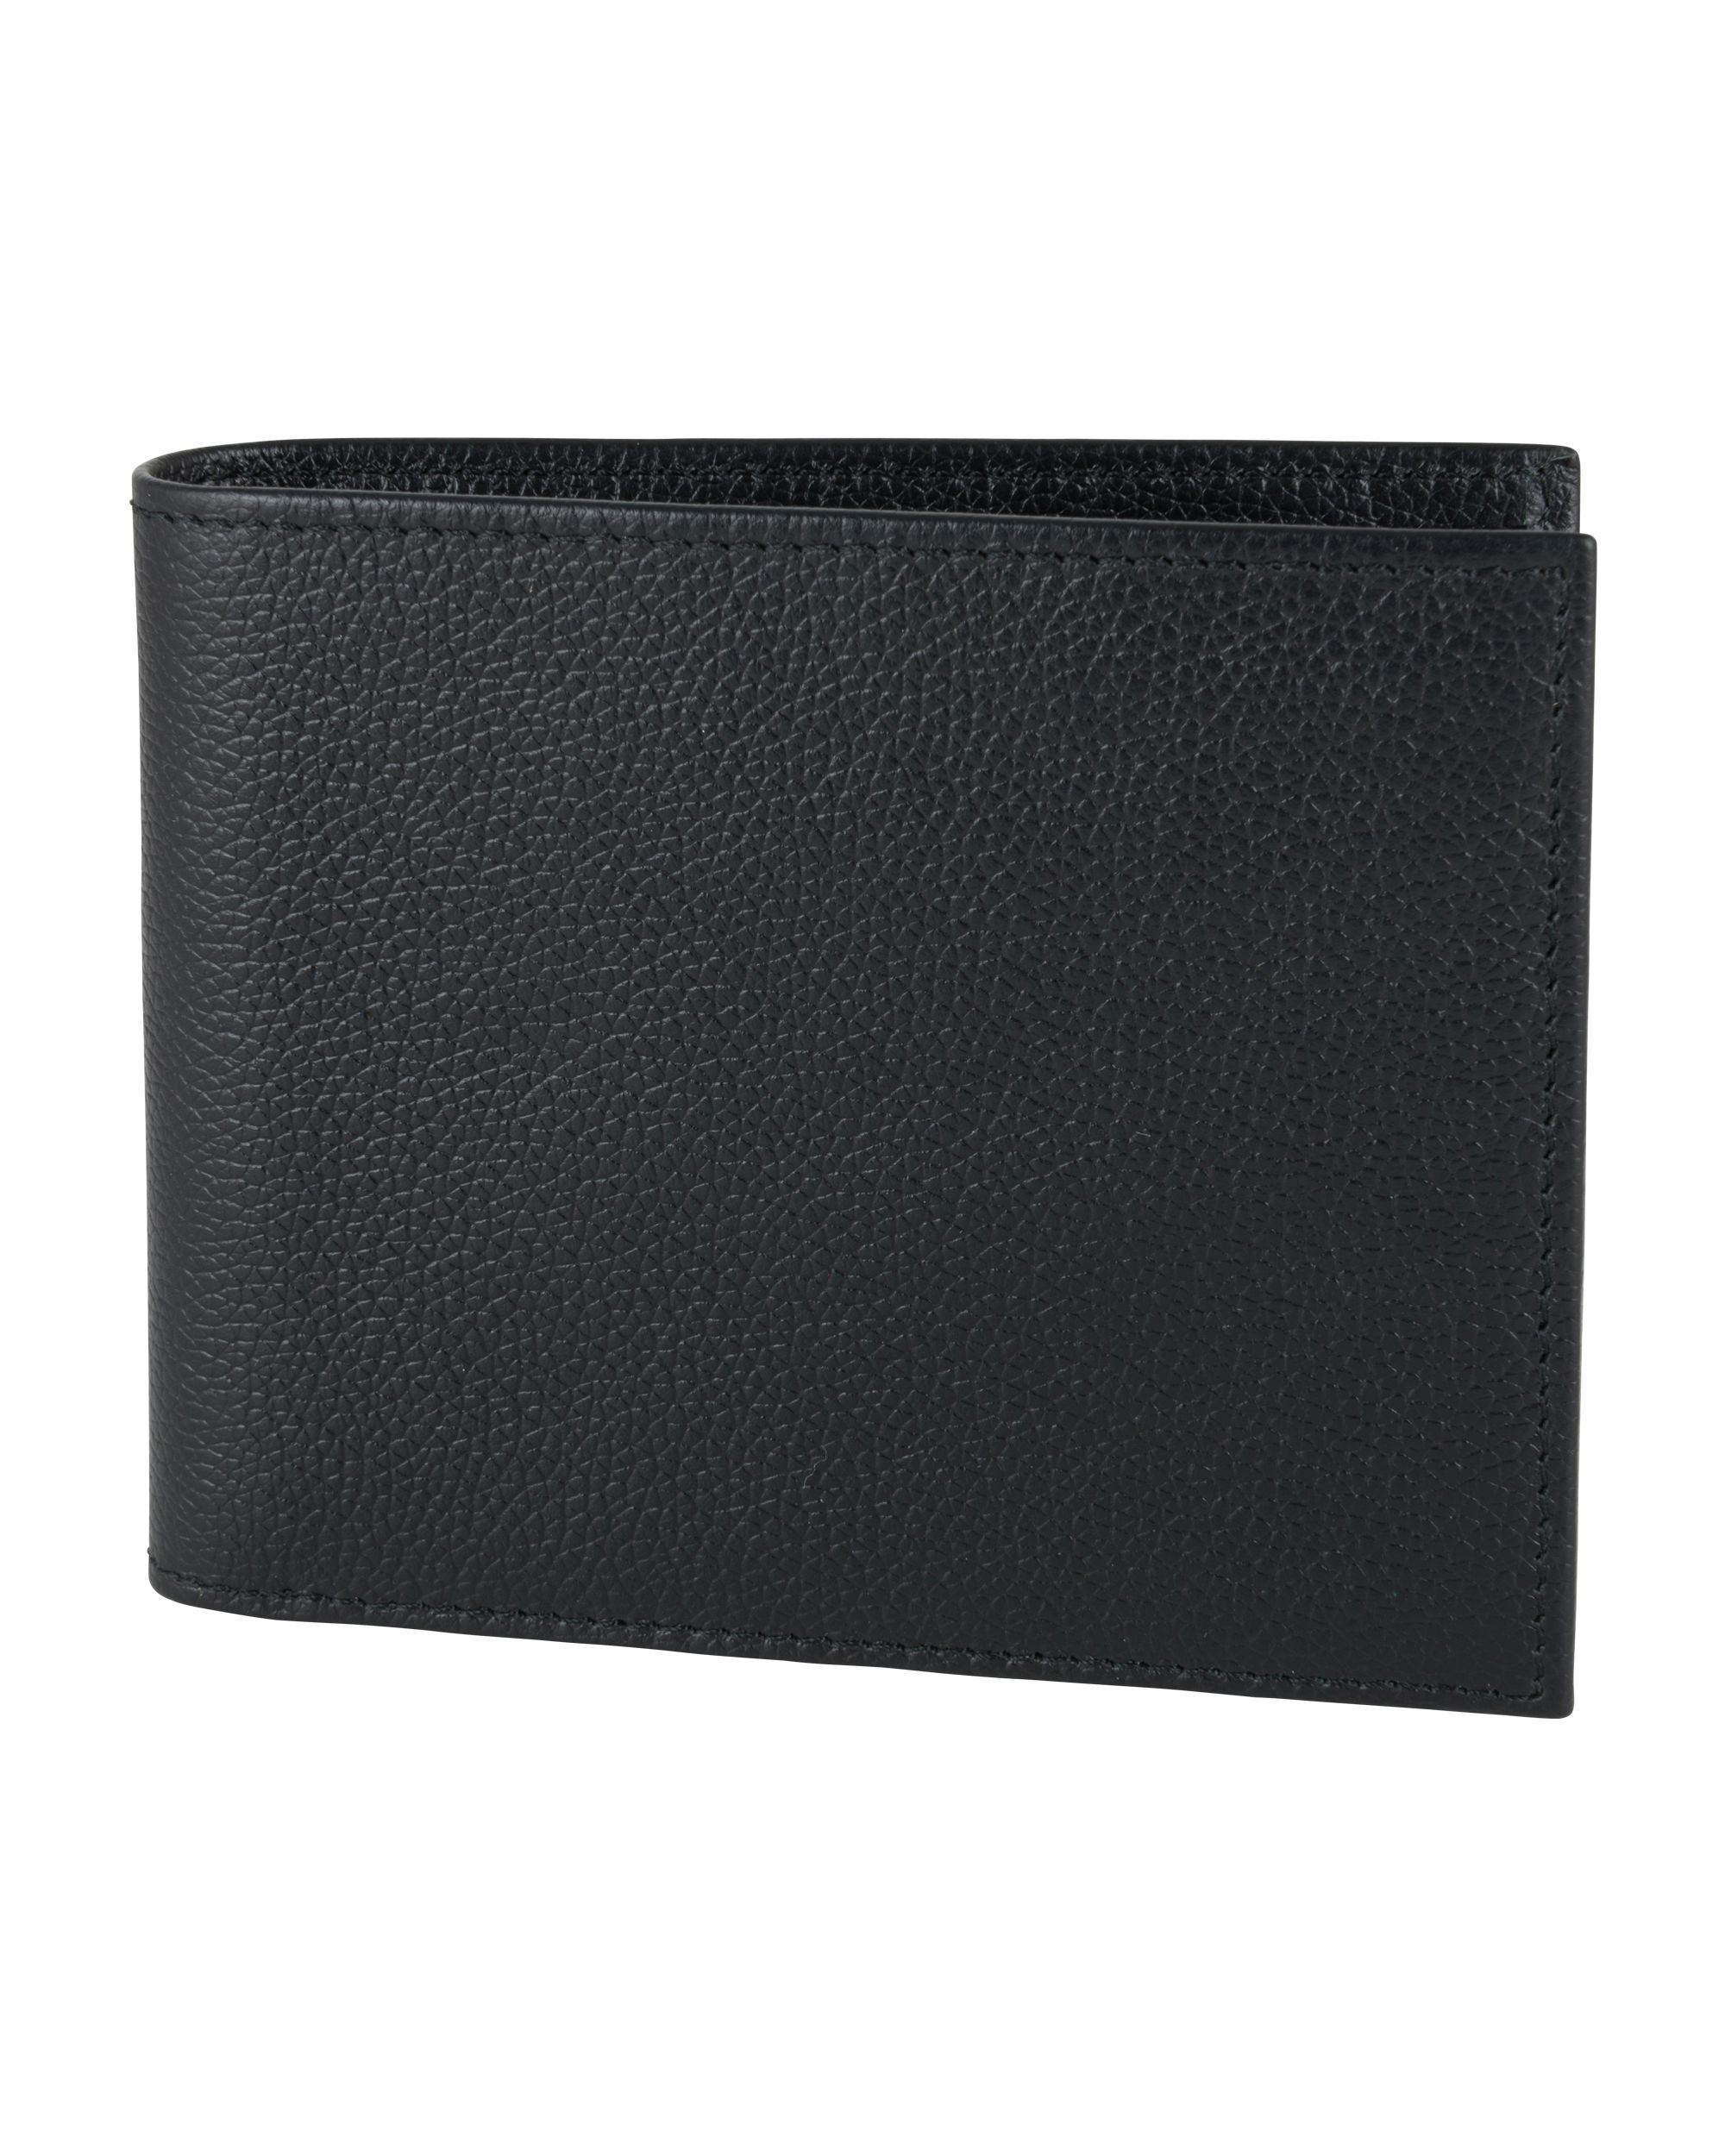 Black Leather Wallet RFID lined with ID Partition and Coin Pouch - Dalaco